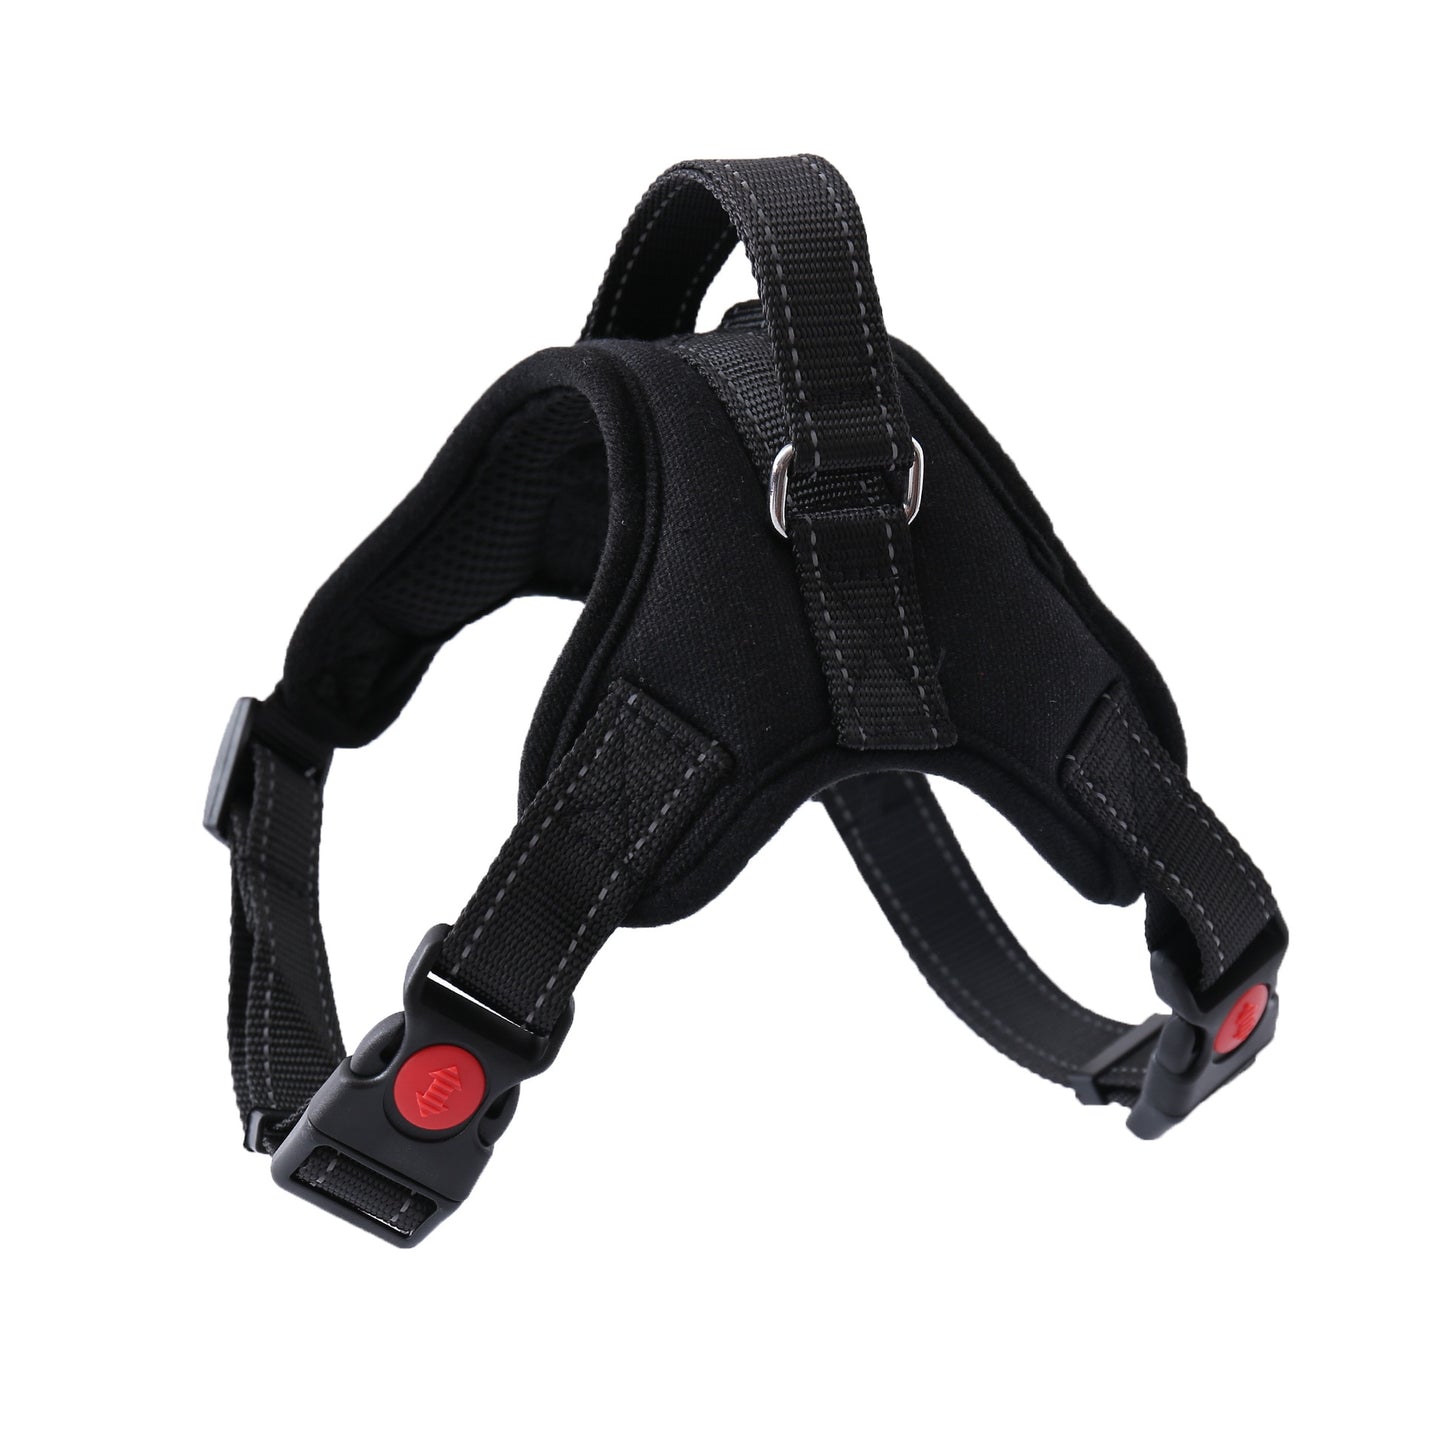 Adjustable Harness with Reflective and Breathable Vest